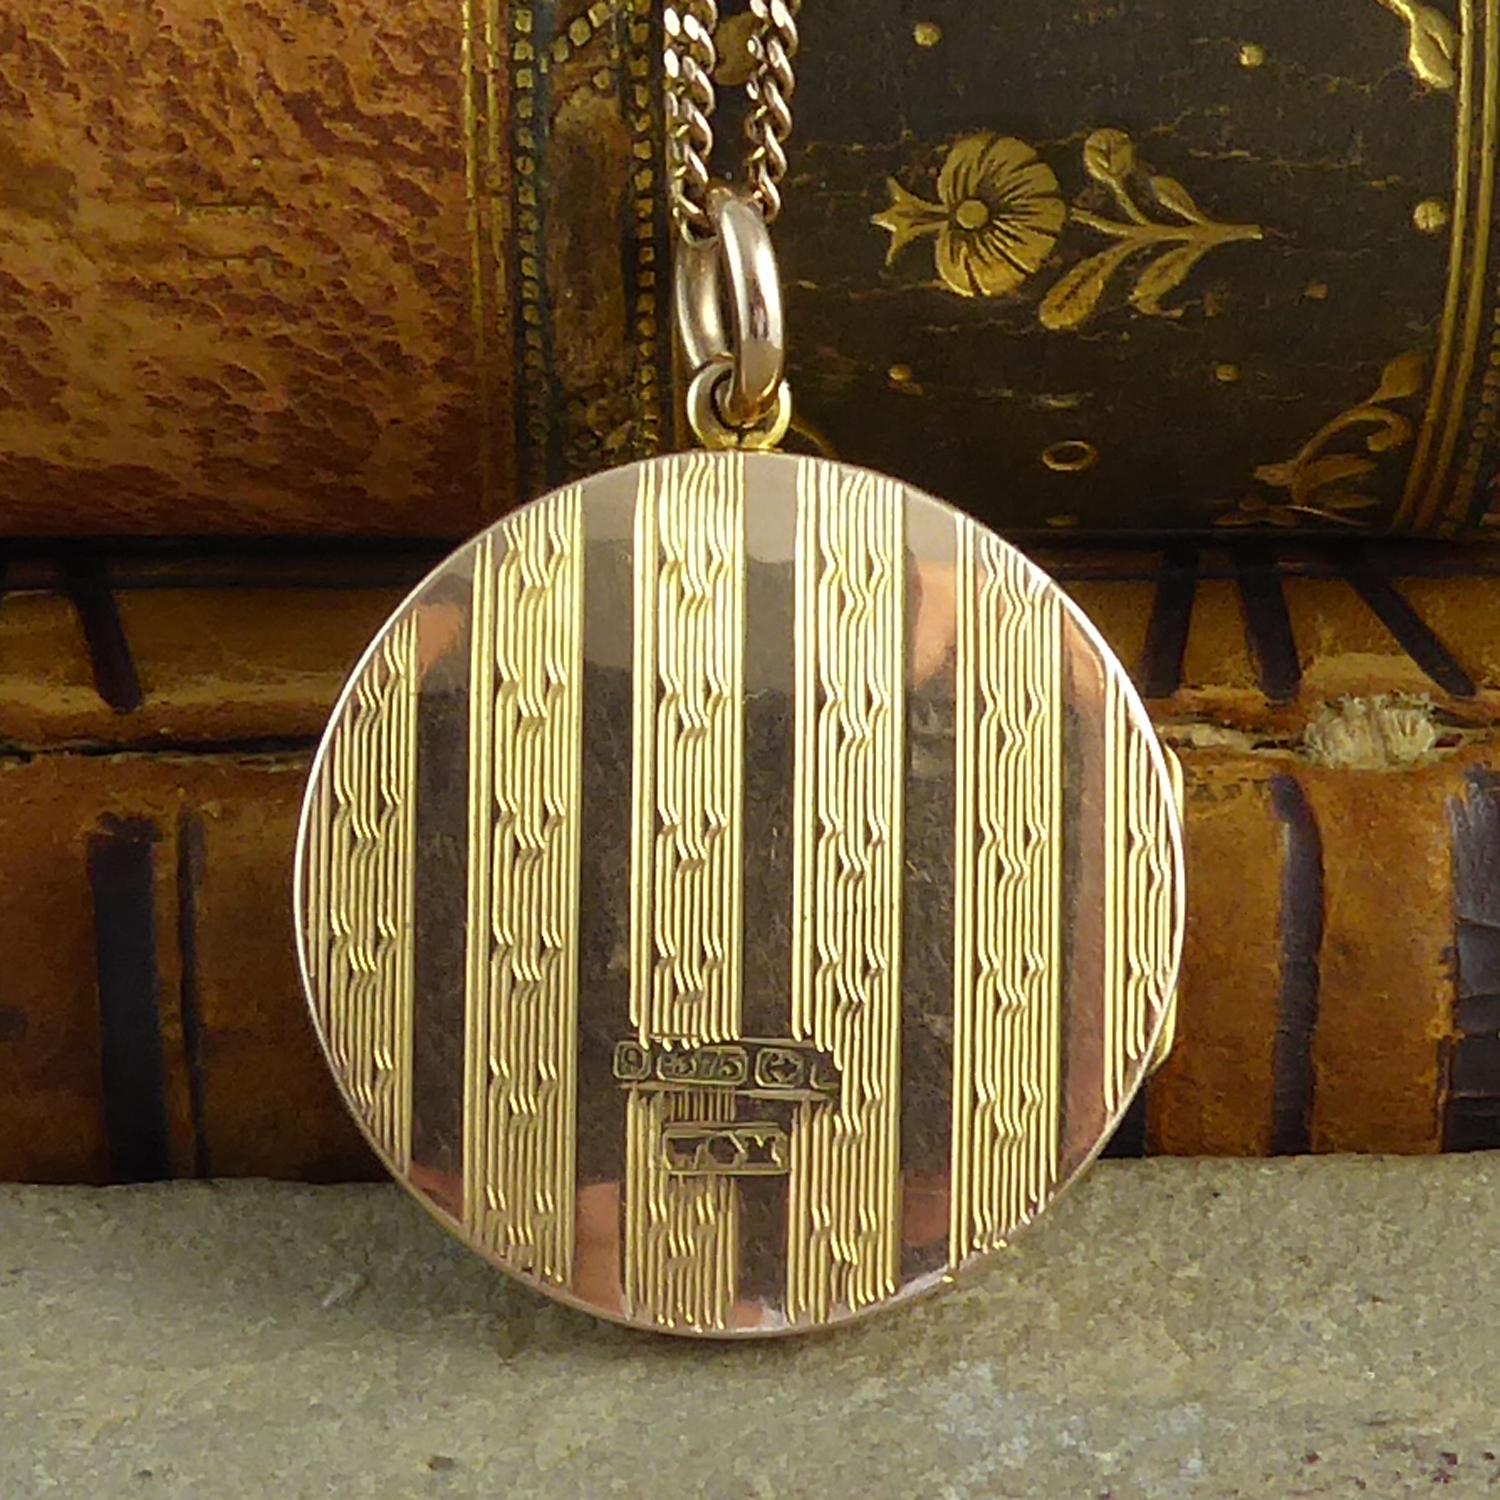 An Art Deco locket circa 1920's with engine-turned engraving typical of the era.  The locket is round and has been engraved on both sides with a striped pattern of plain polished stripes alternating with a reeded pattern stripe further adorned with